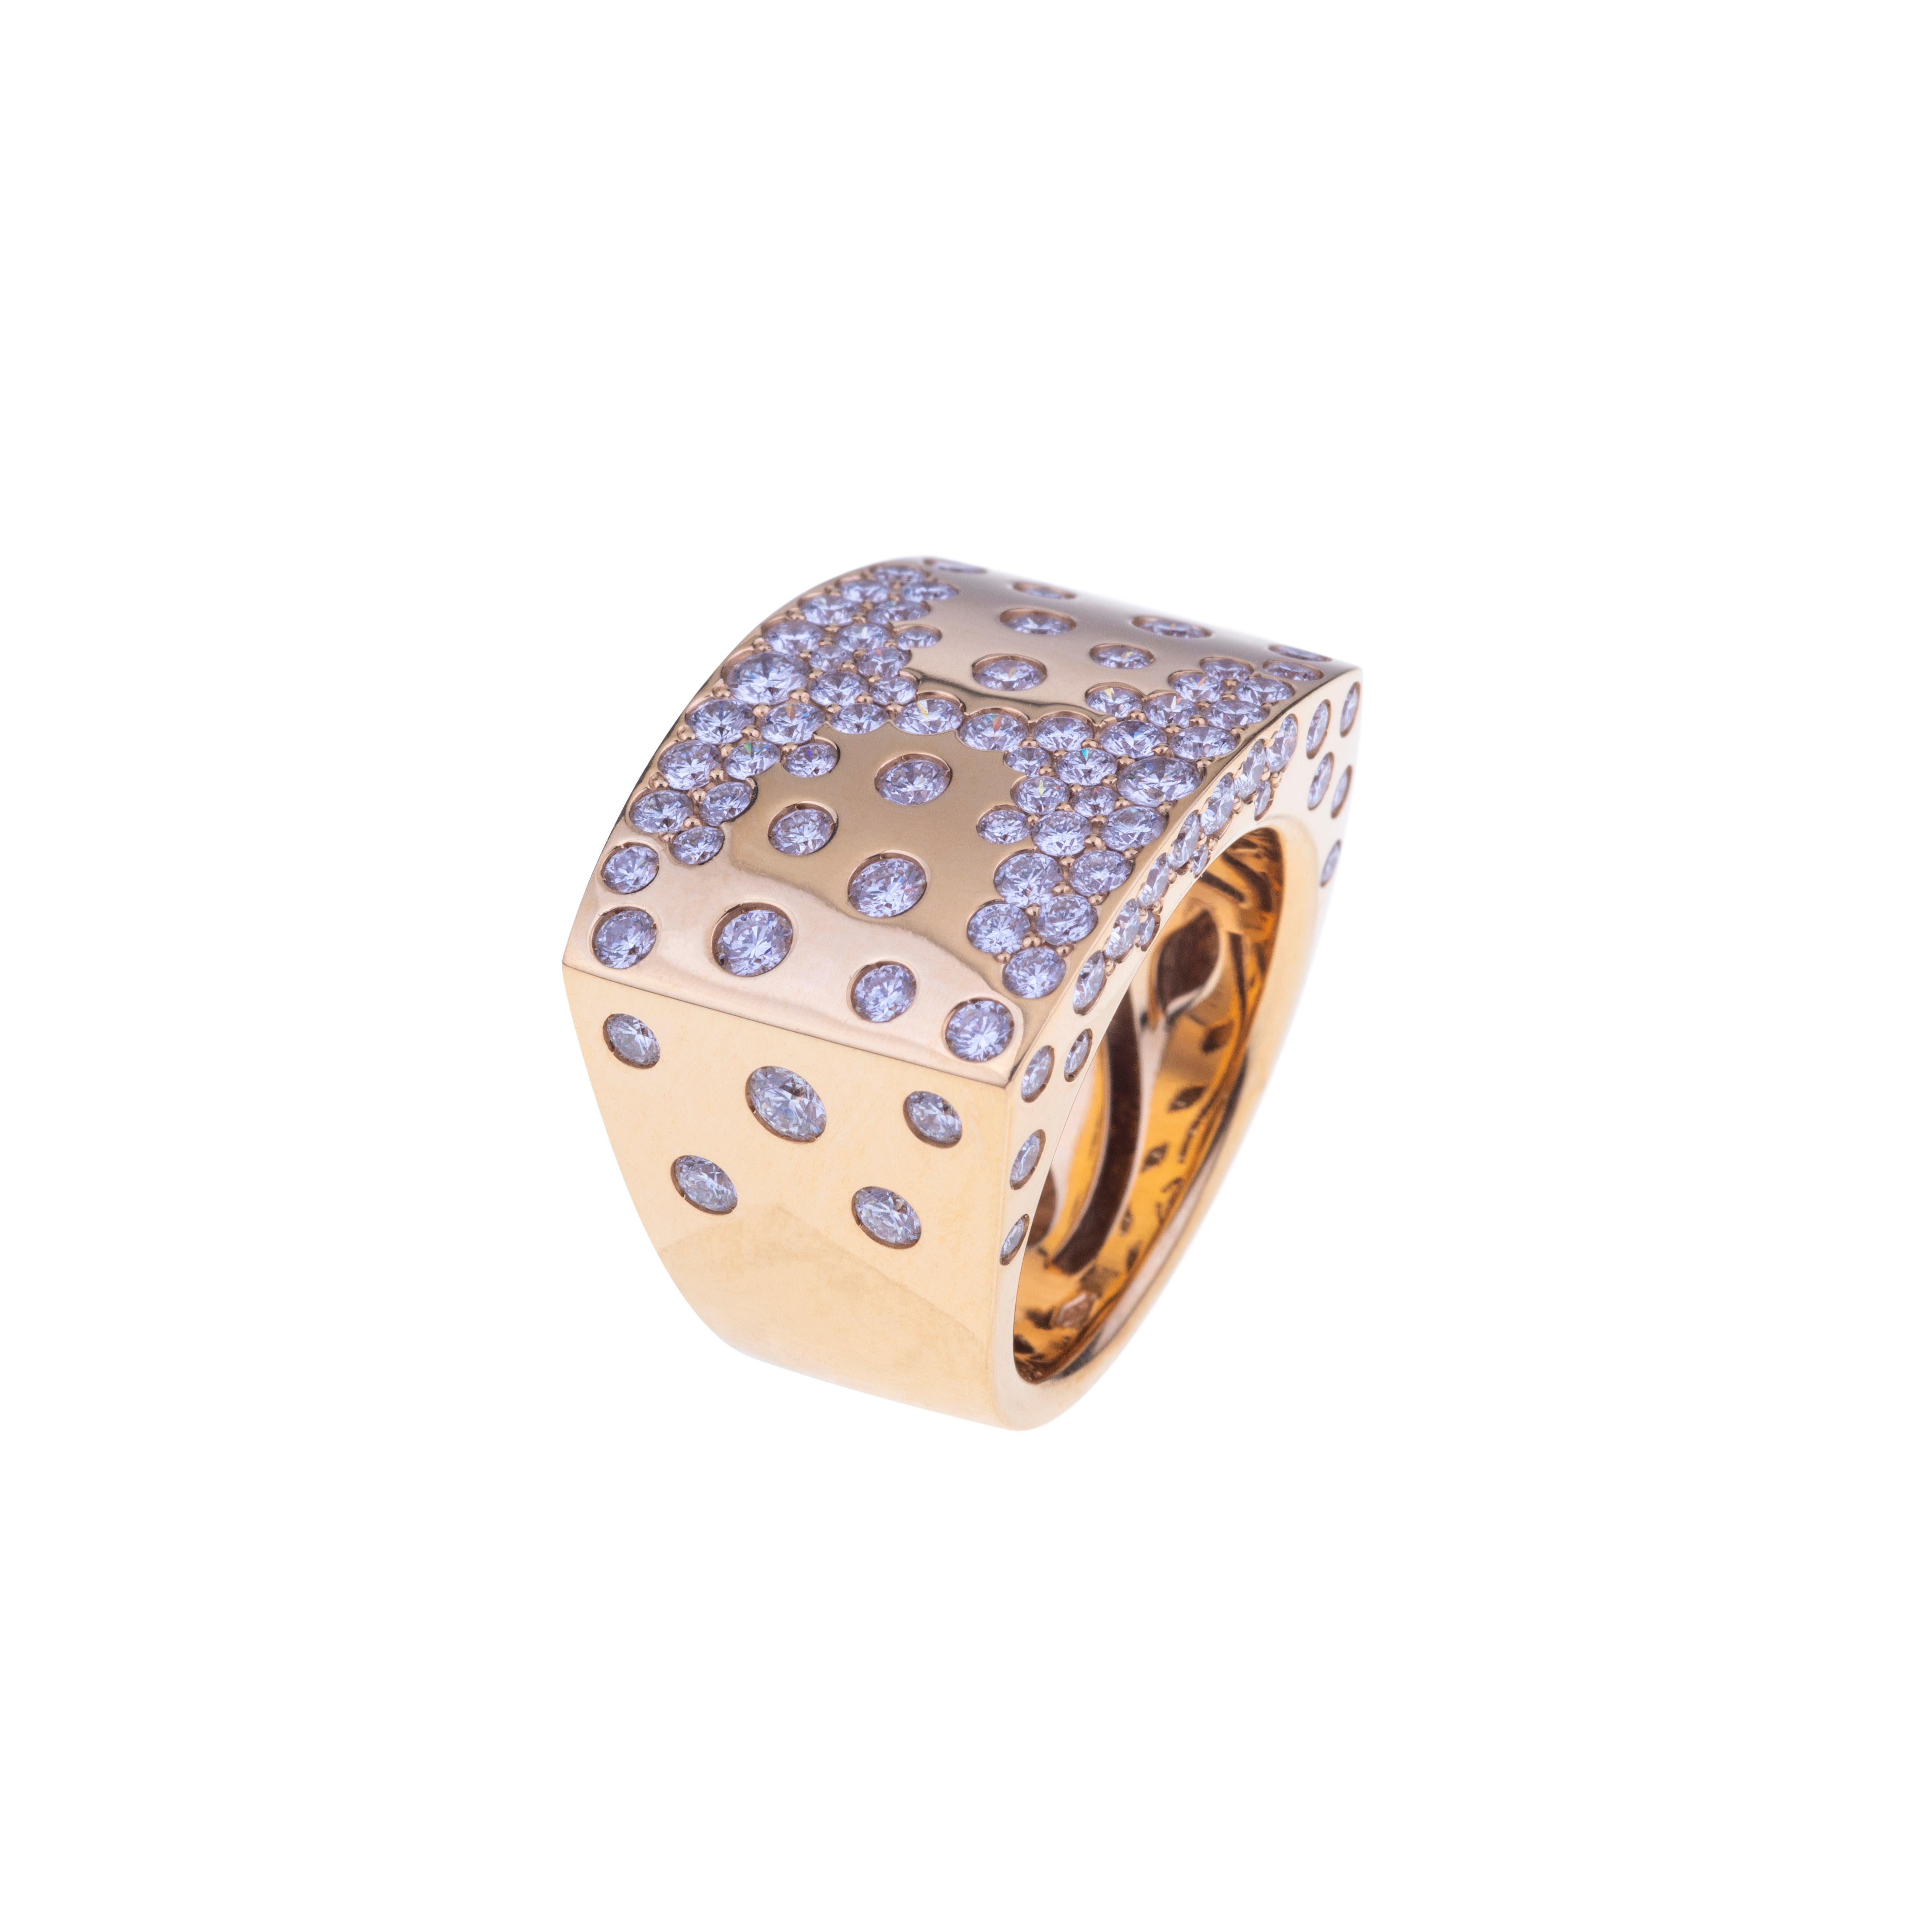 Pink Gold Band Ring with Mixed Diamonds.
An  Extraordinary Random Diamond Design where stones are set on a Gold Band Ring for  Cocktails and Elegant Social Events.
The Weight of 18kt Gold is gr. 15.1 and Diamonds are ct. 2.80 G SI.
Wholly